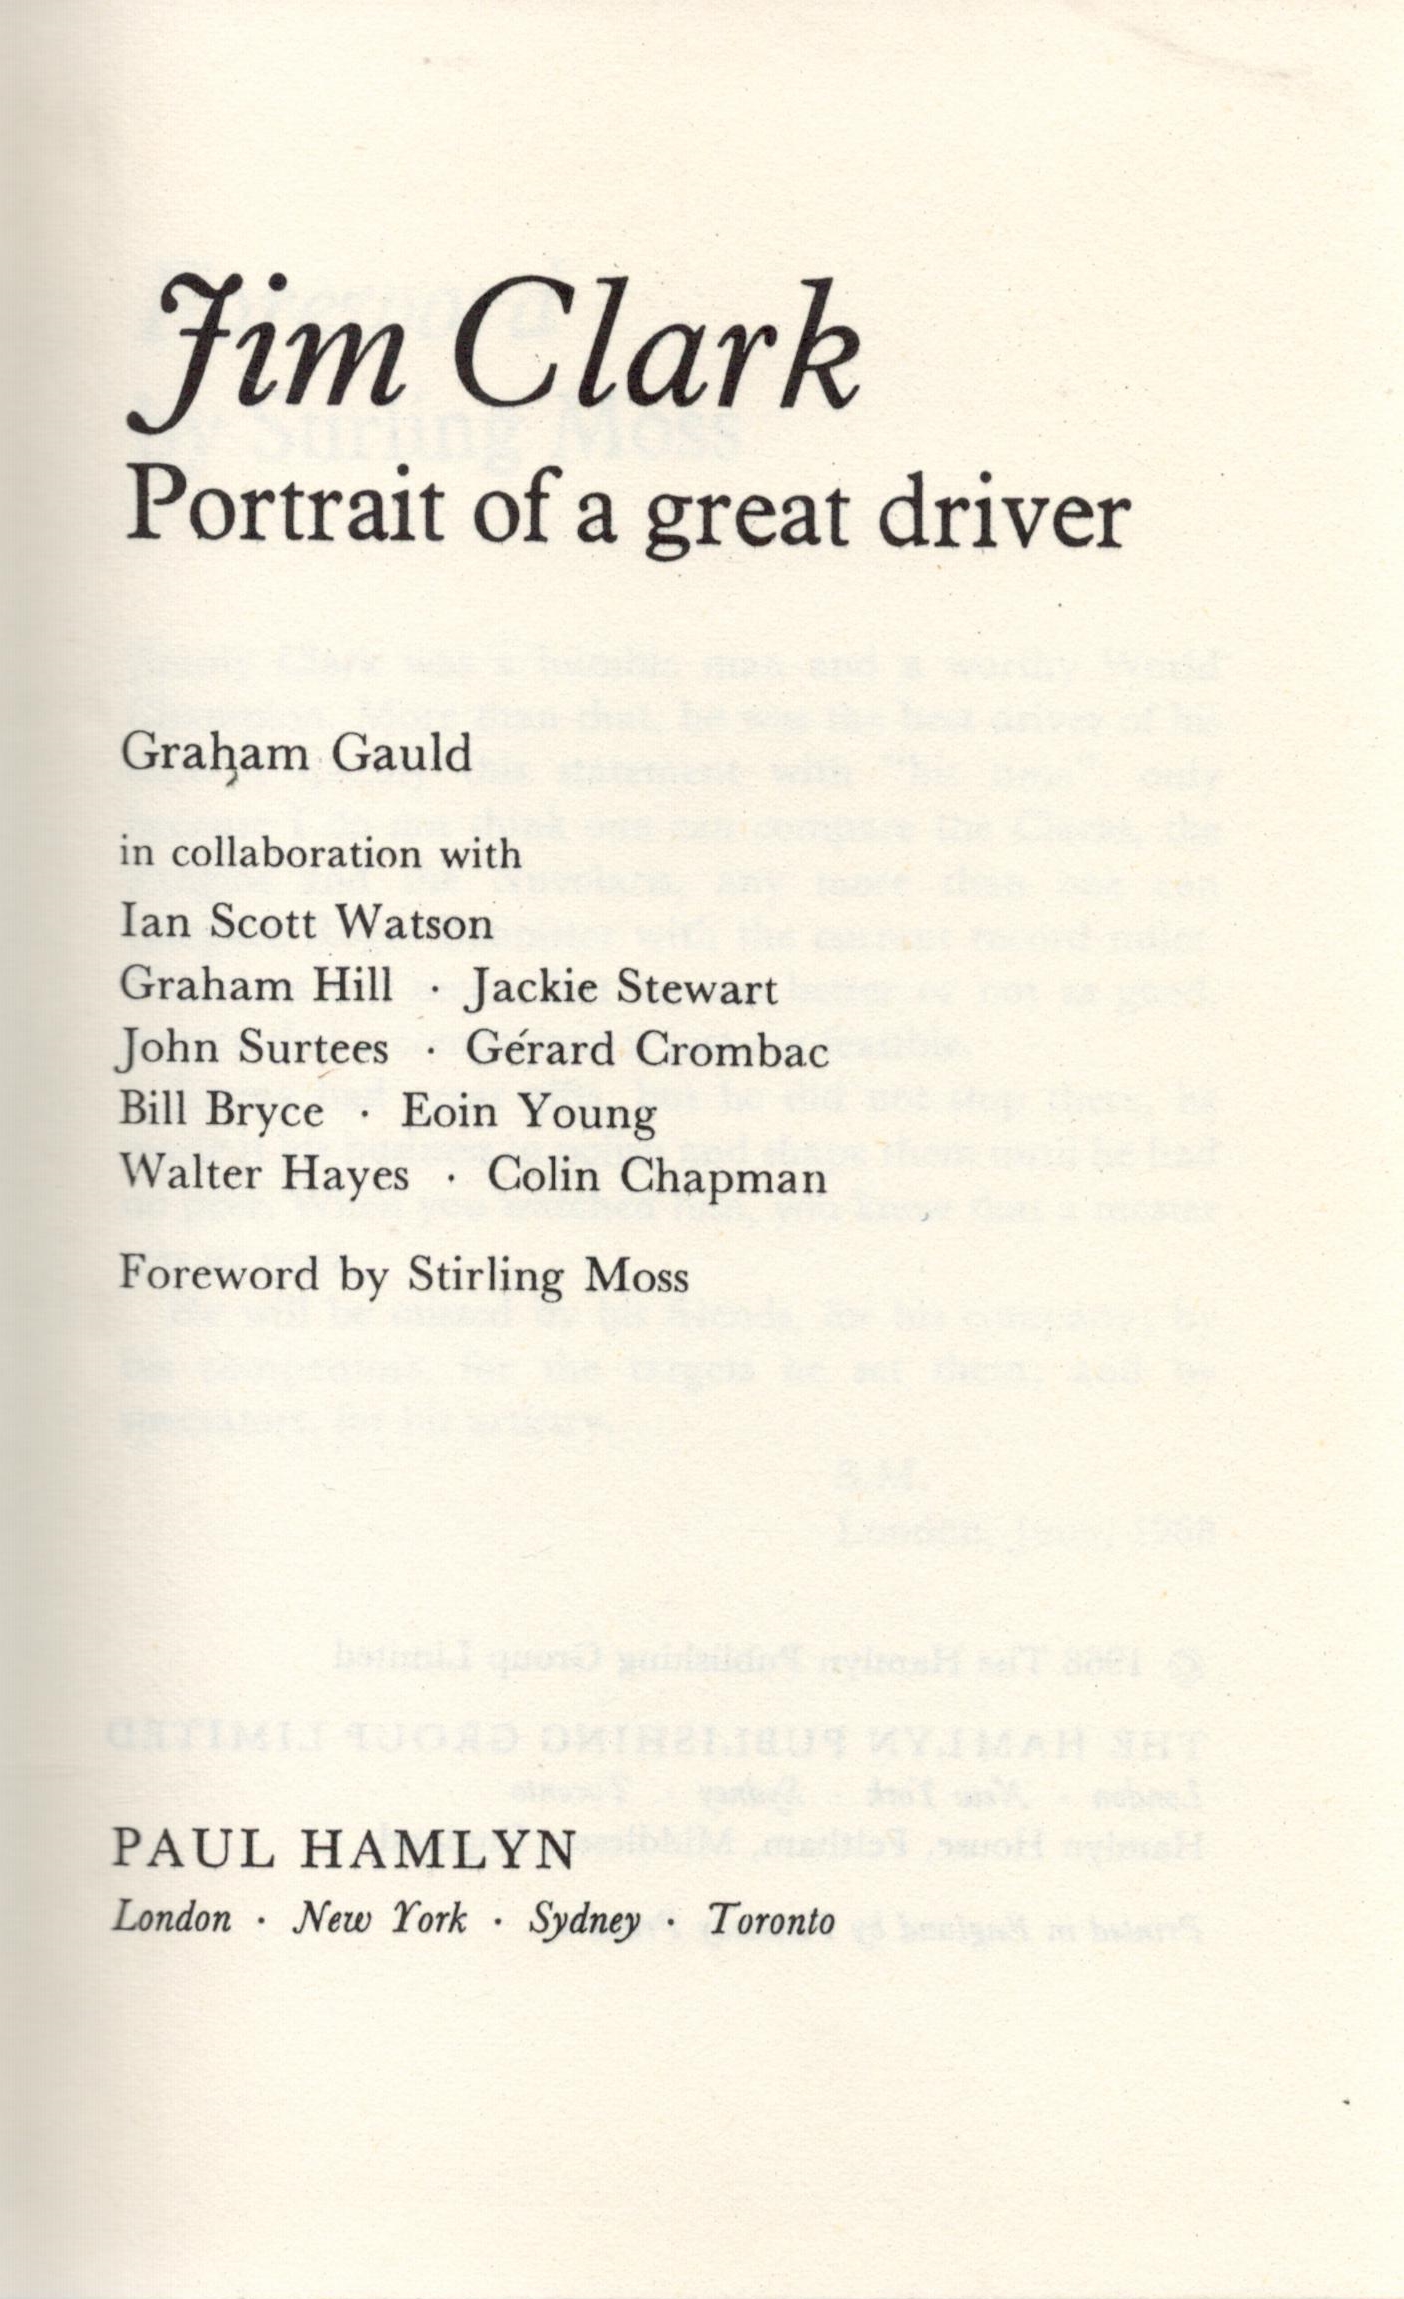 Jim Clark Portrait of A Great Driver by Graham Gauld Hardback Book 1968 First Edition published by - Image 2 of 3